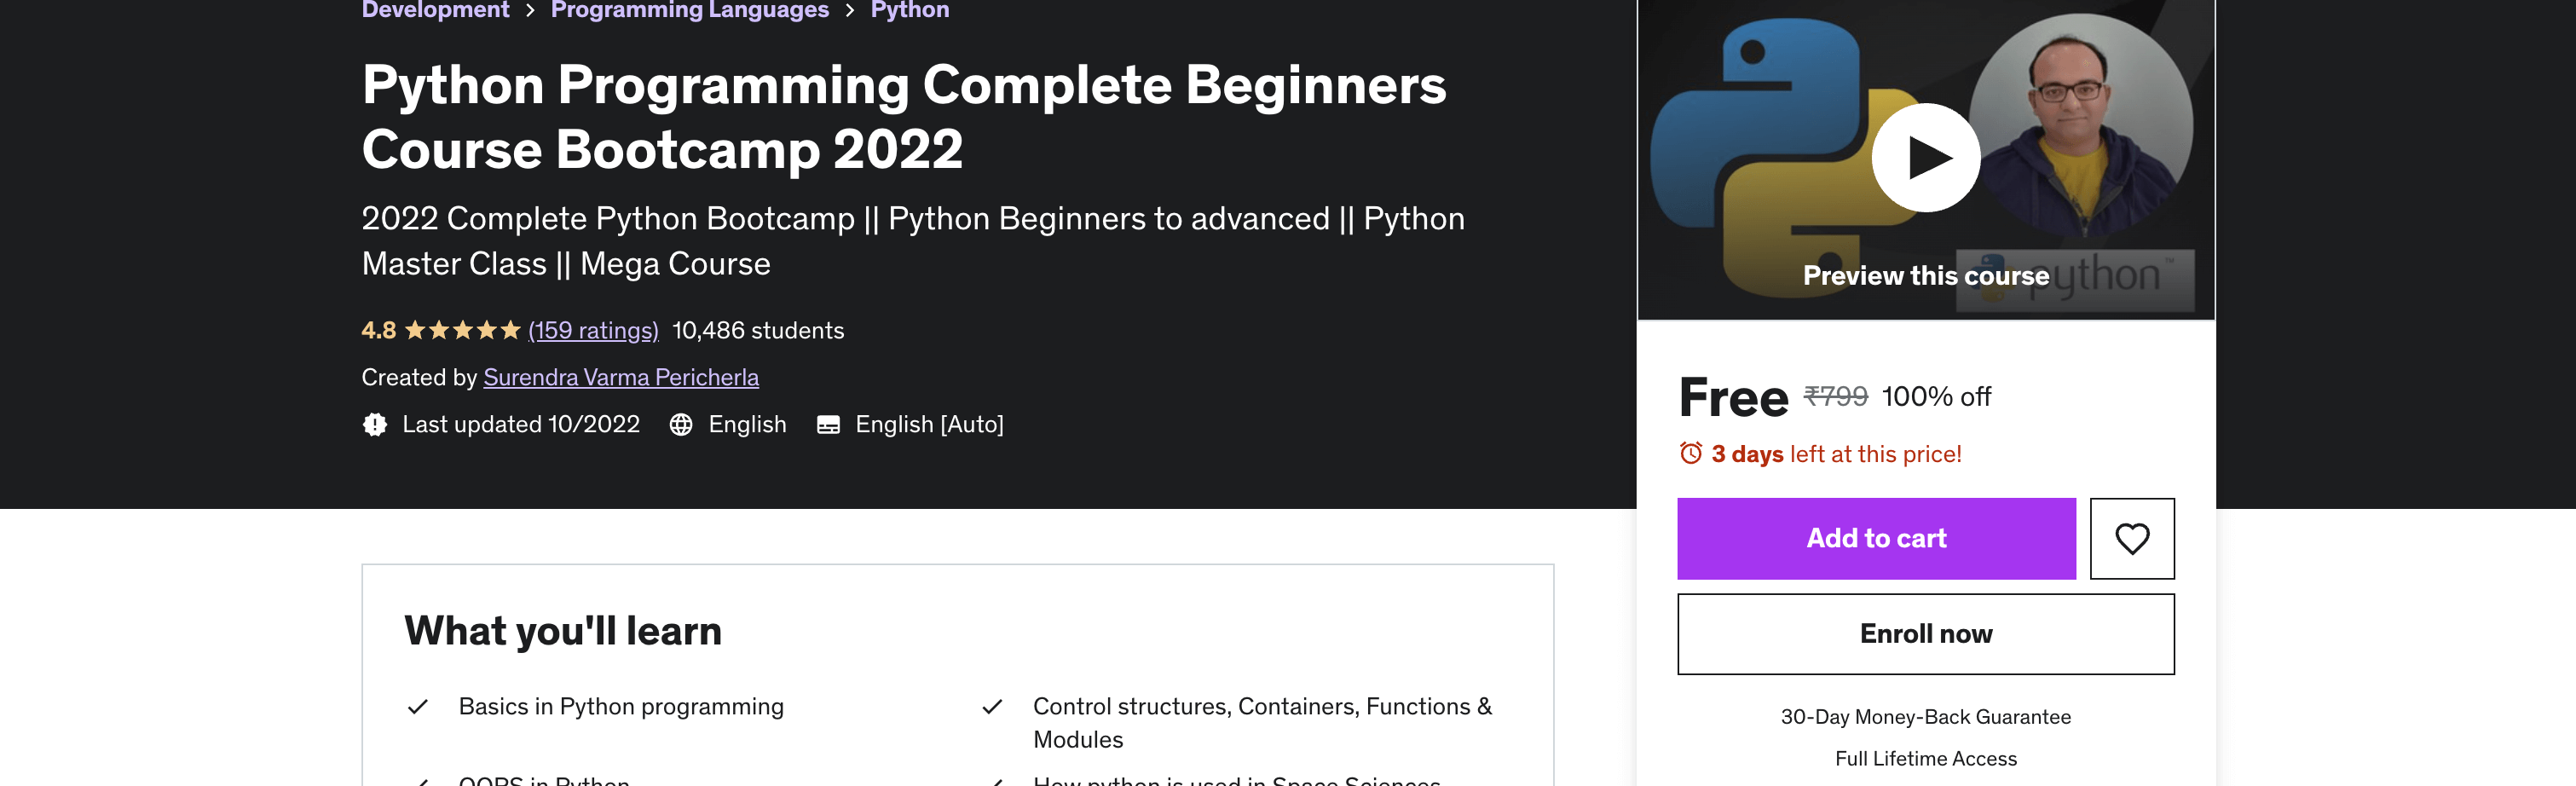 Python Programming Complete Beginners Course Bootcamp 2022 